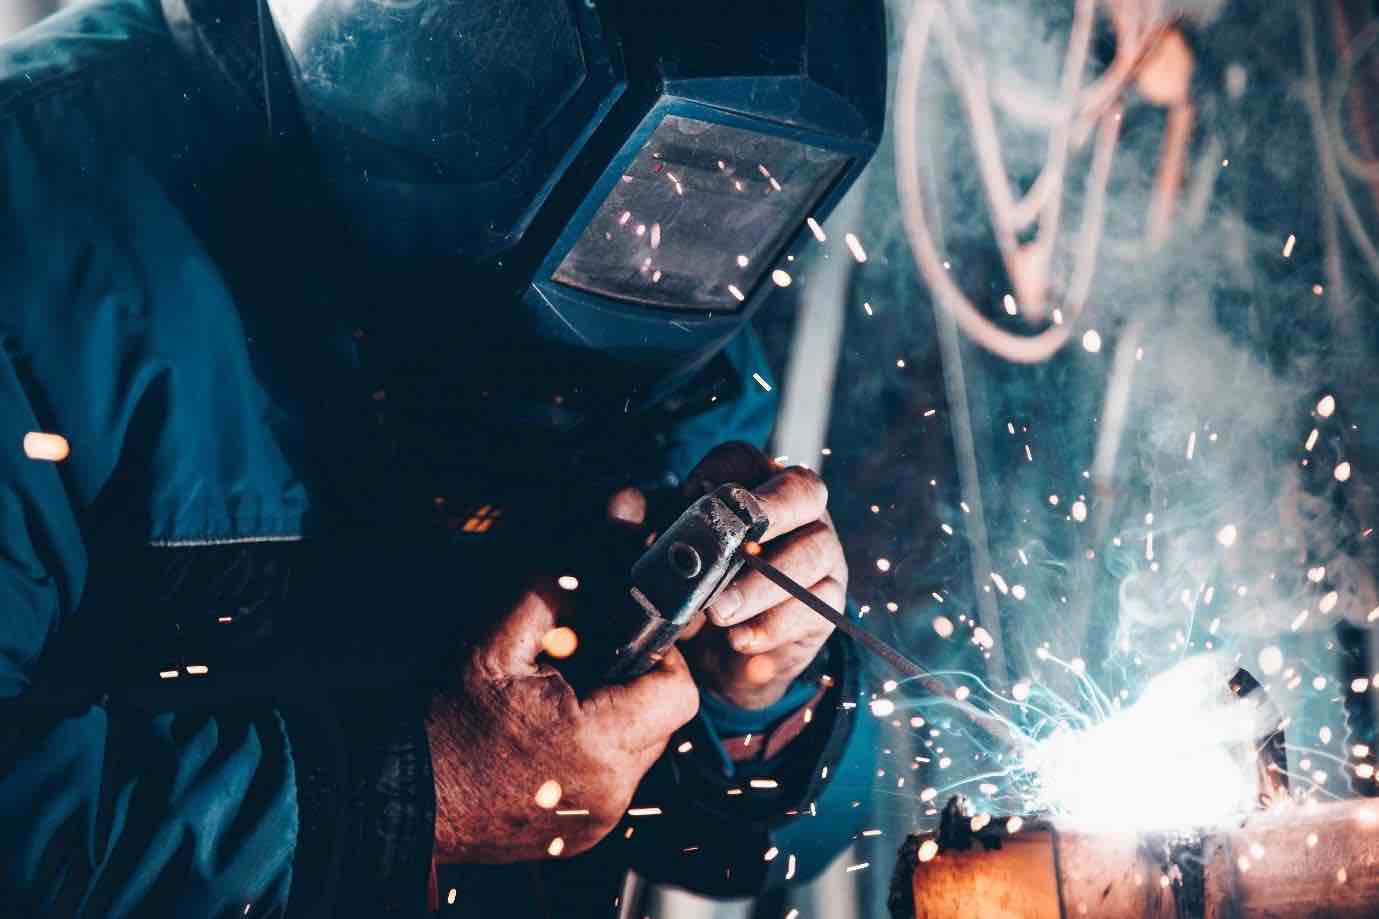 A welder wearing a safety mask while sparks fly